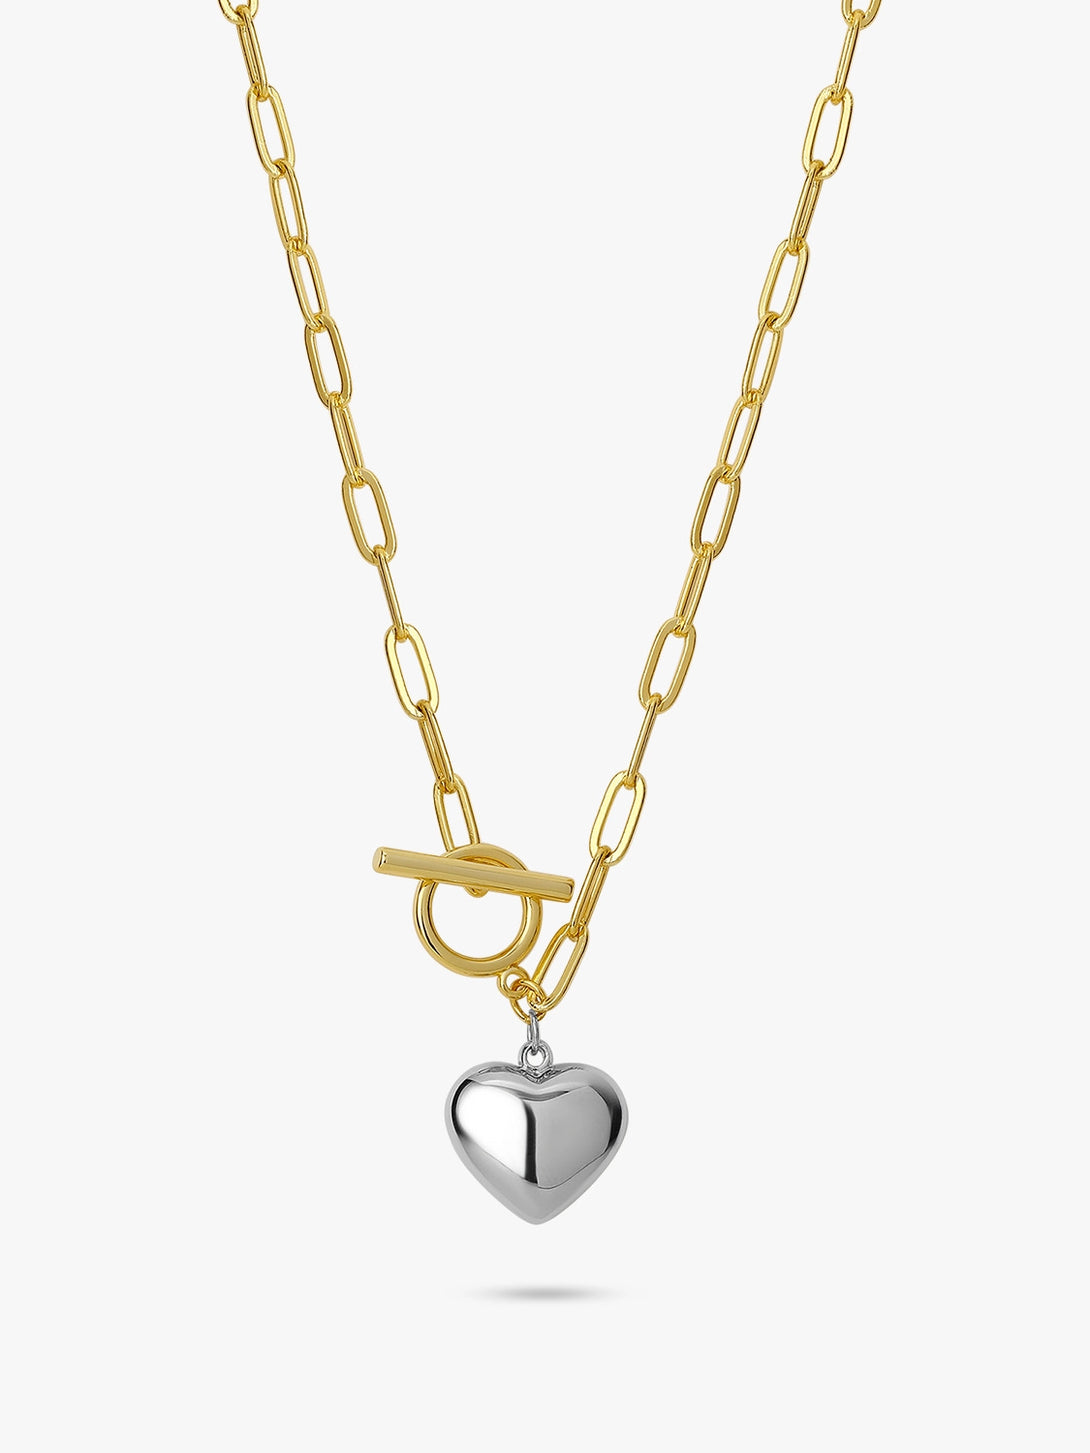 Unisex Heart Pendant Necklace - OOTDY